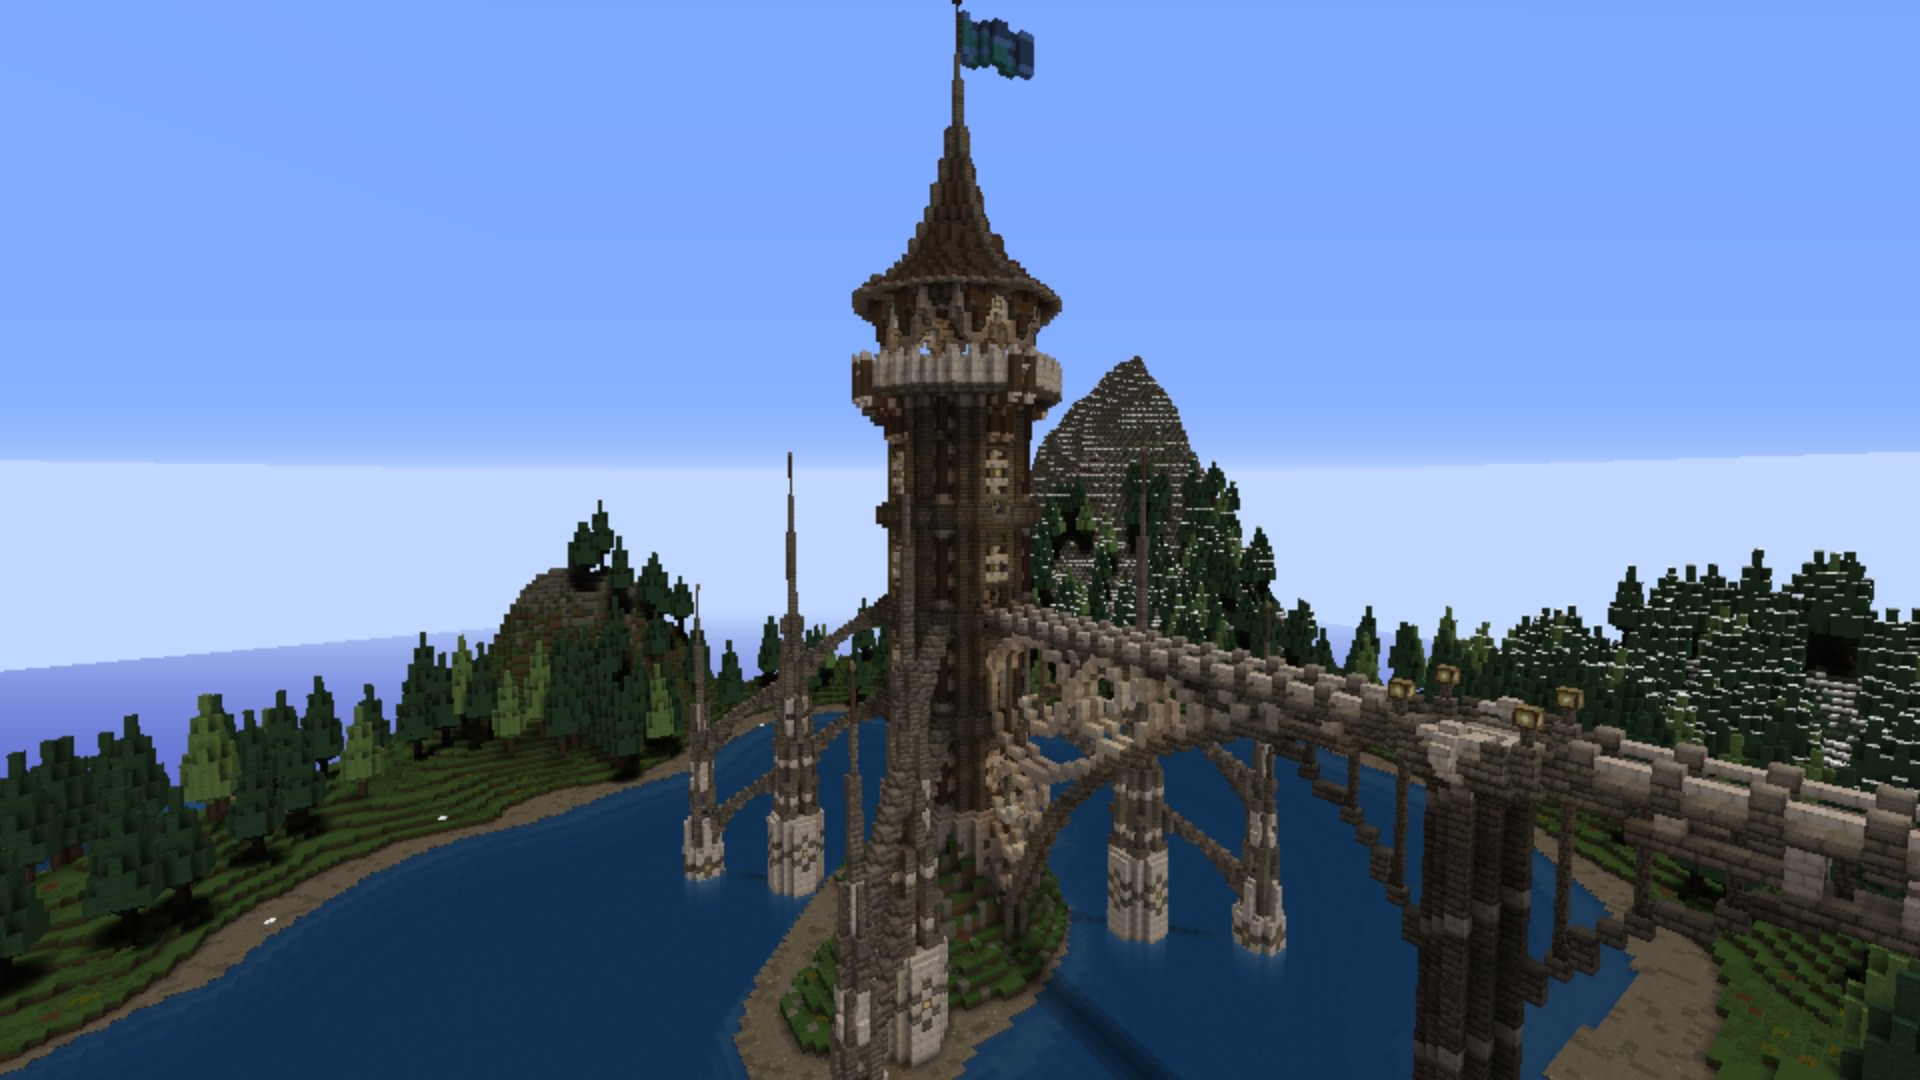 Tower and bridge built in a lake